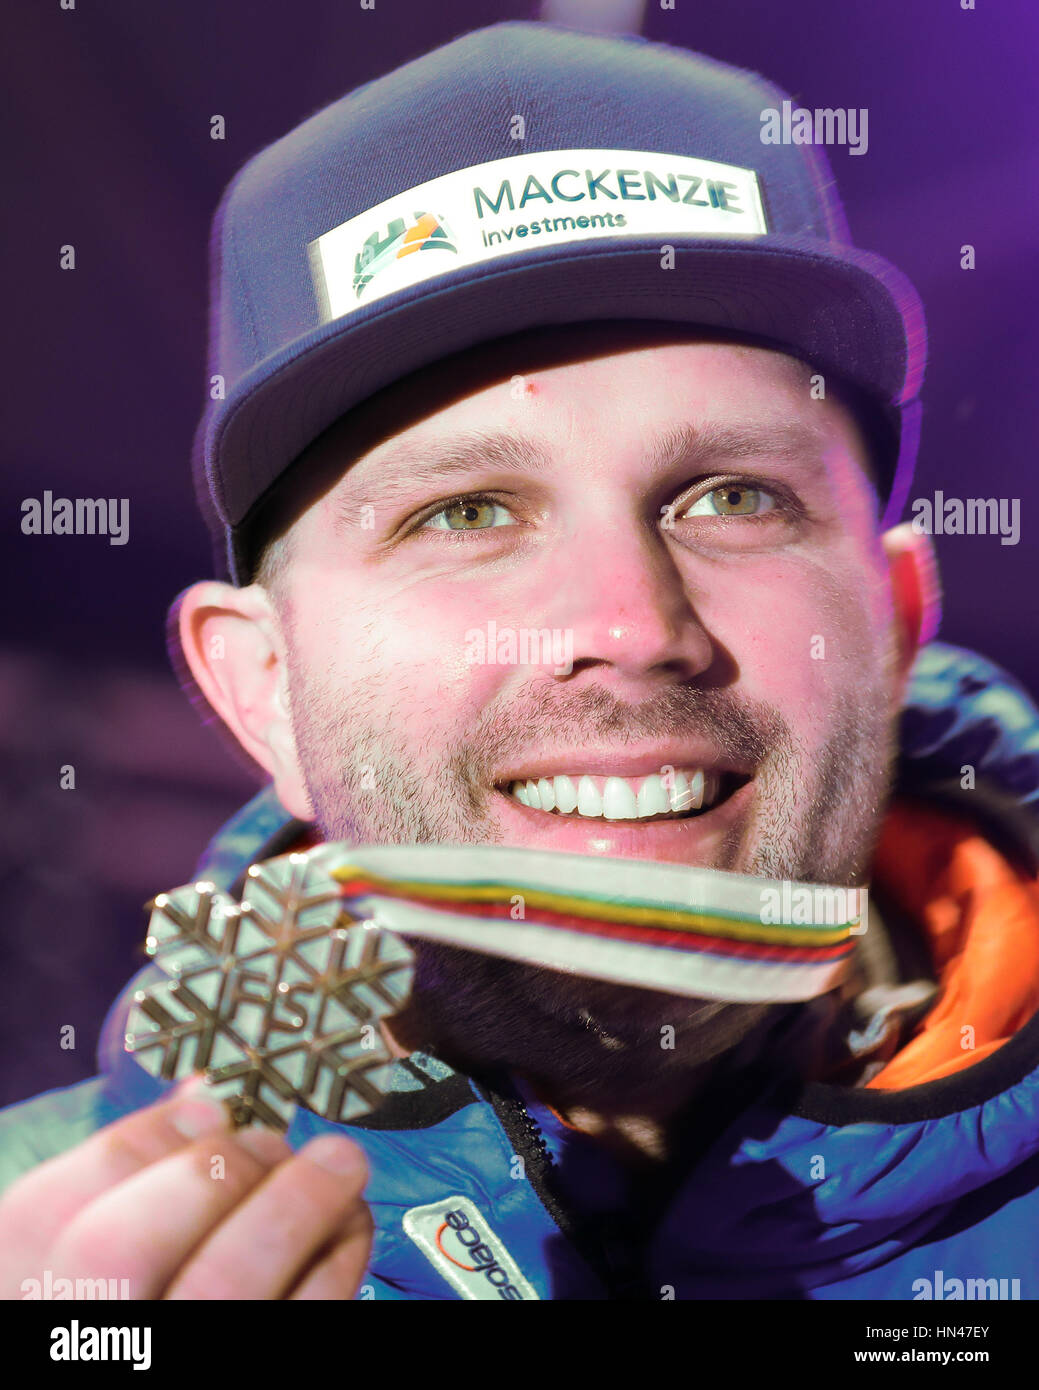 St. Moritz, Germany. 08th Feb, 2017. Manuel Osborne-Paradise of Canada showing his bronze medal at the victory ceremony for the Super G men's event at the Alpine Skiing World Cup in St. Moritz, Germany, 08 February 2017. Photo: Michael Kappeler/dpa/Alamy Live News Stock Photo